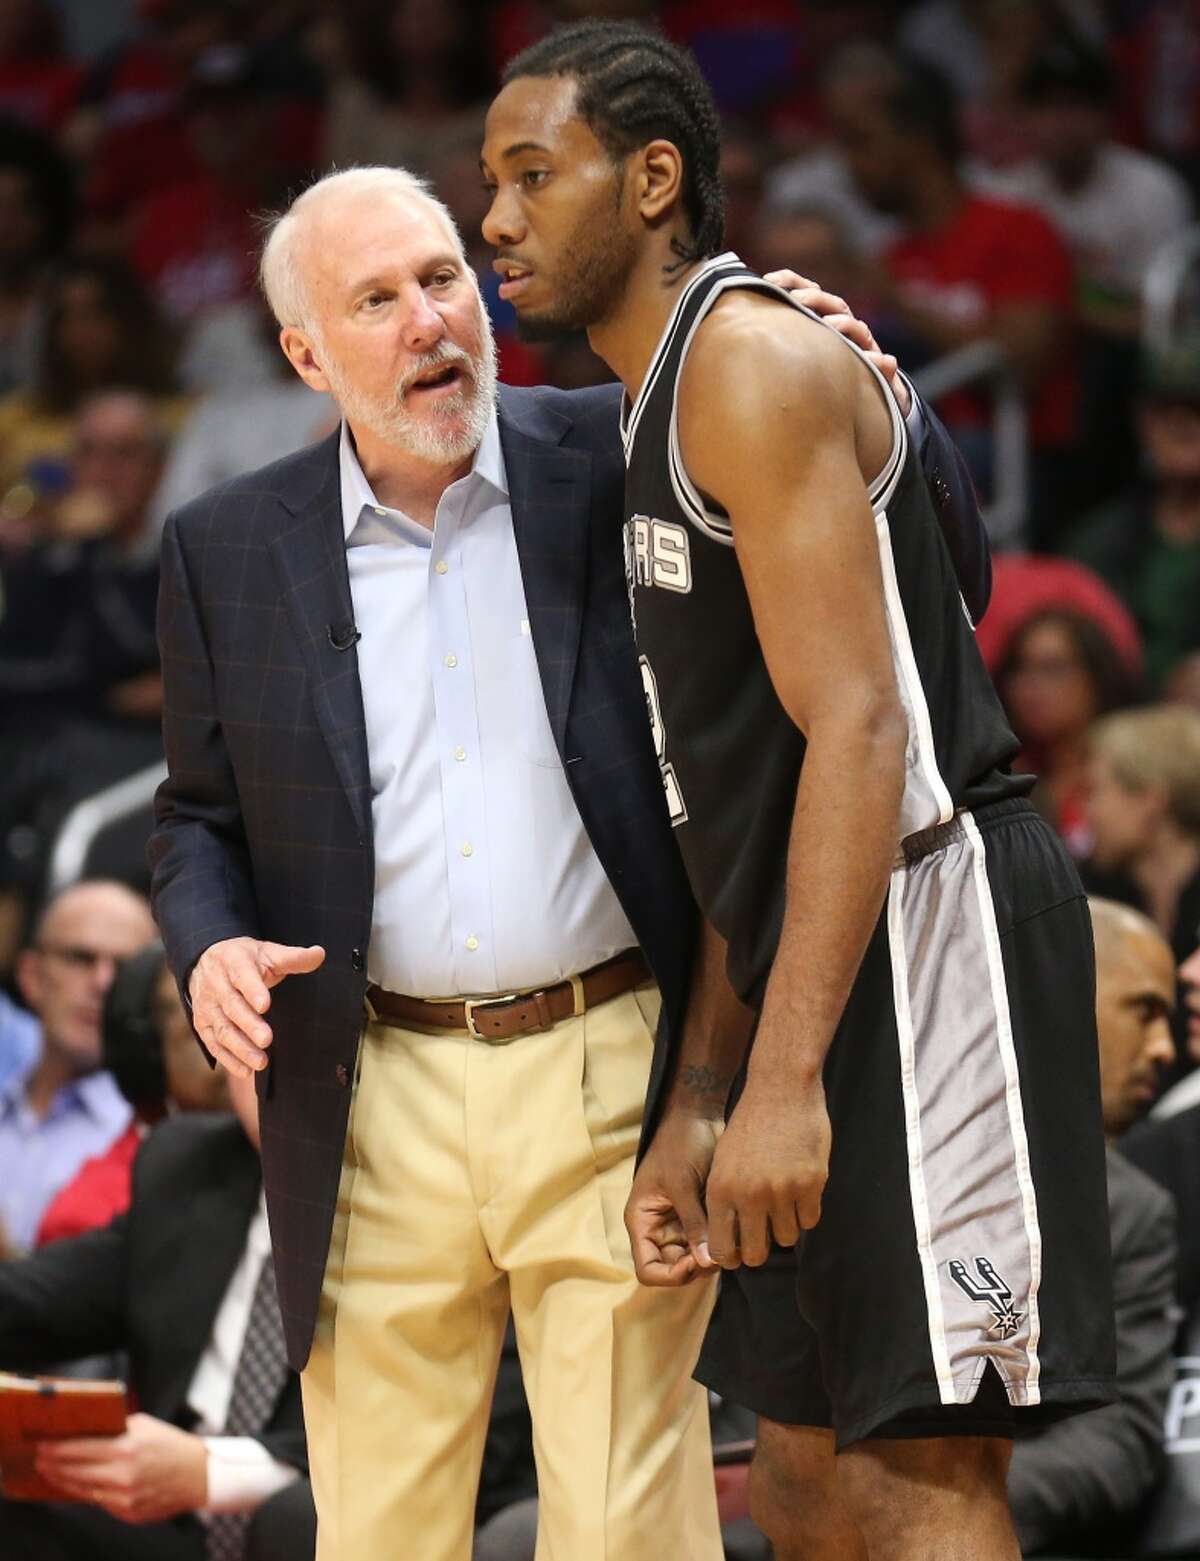 LOS ANGELES, CA - APRIL 28: Head coach Gregg Popovich and Kawhi Leonard #2 of the San Antonio Spurs confer as they play the Los Angeles Clippers during Game Five of the Western Conference quarterfinals of the 2015 NBA Playoffs at Staples Center on April 28, 2015 in Los Angeles, California. The Spurs won 111-107. NOTE TO USER: User expressly acknowledges and agrees that, by downloading and or using this photograph, User is consenting to the terms and conditions of the Getty Images License Agreement. (Photo by Stephen Dunn/Getty Images)